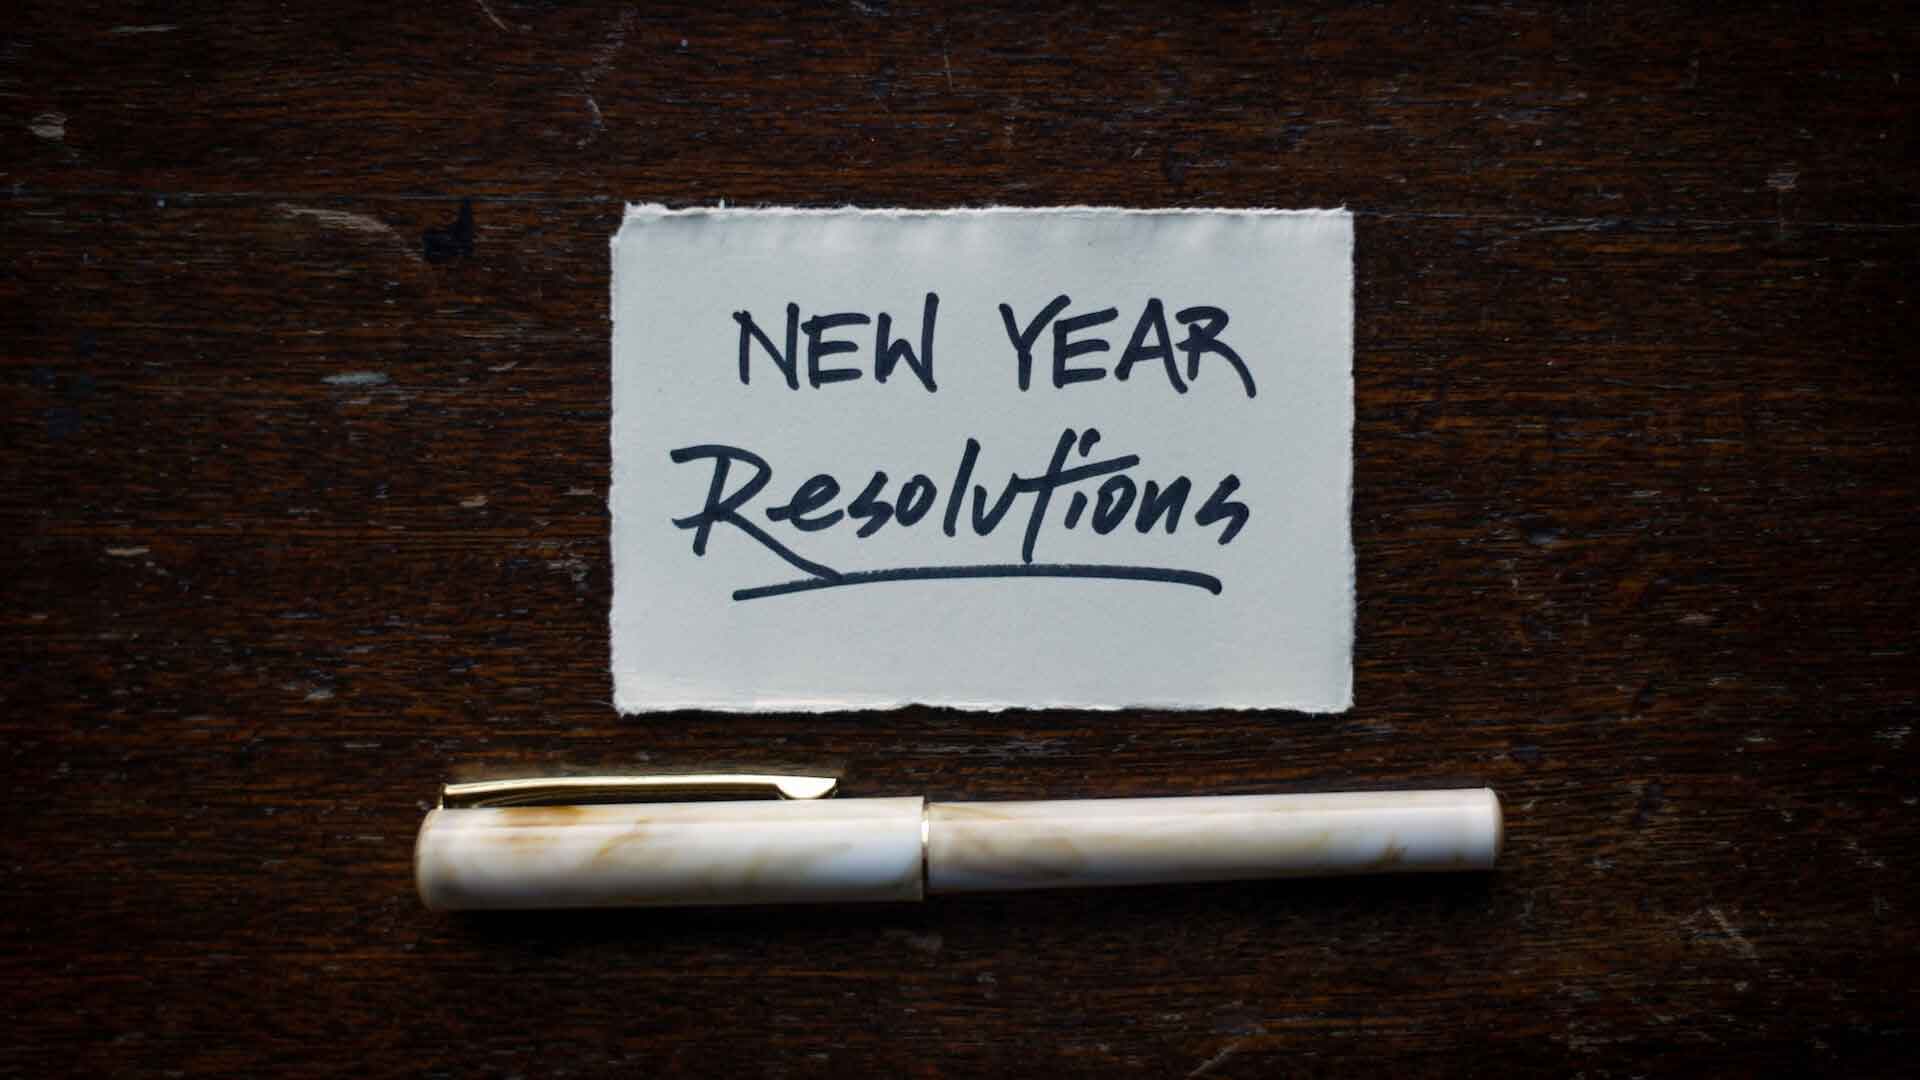 New Year resolutions note.